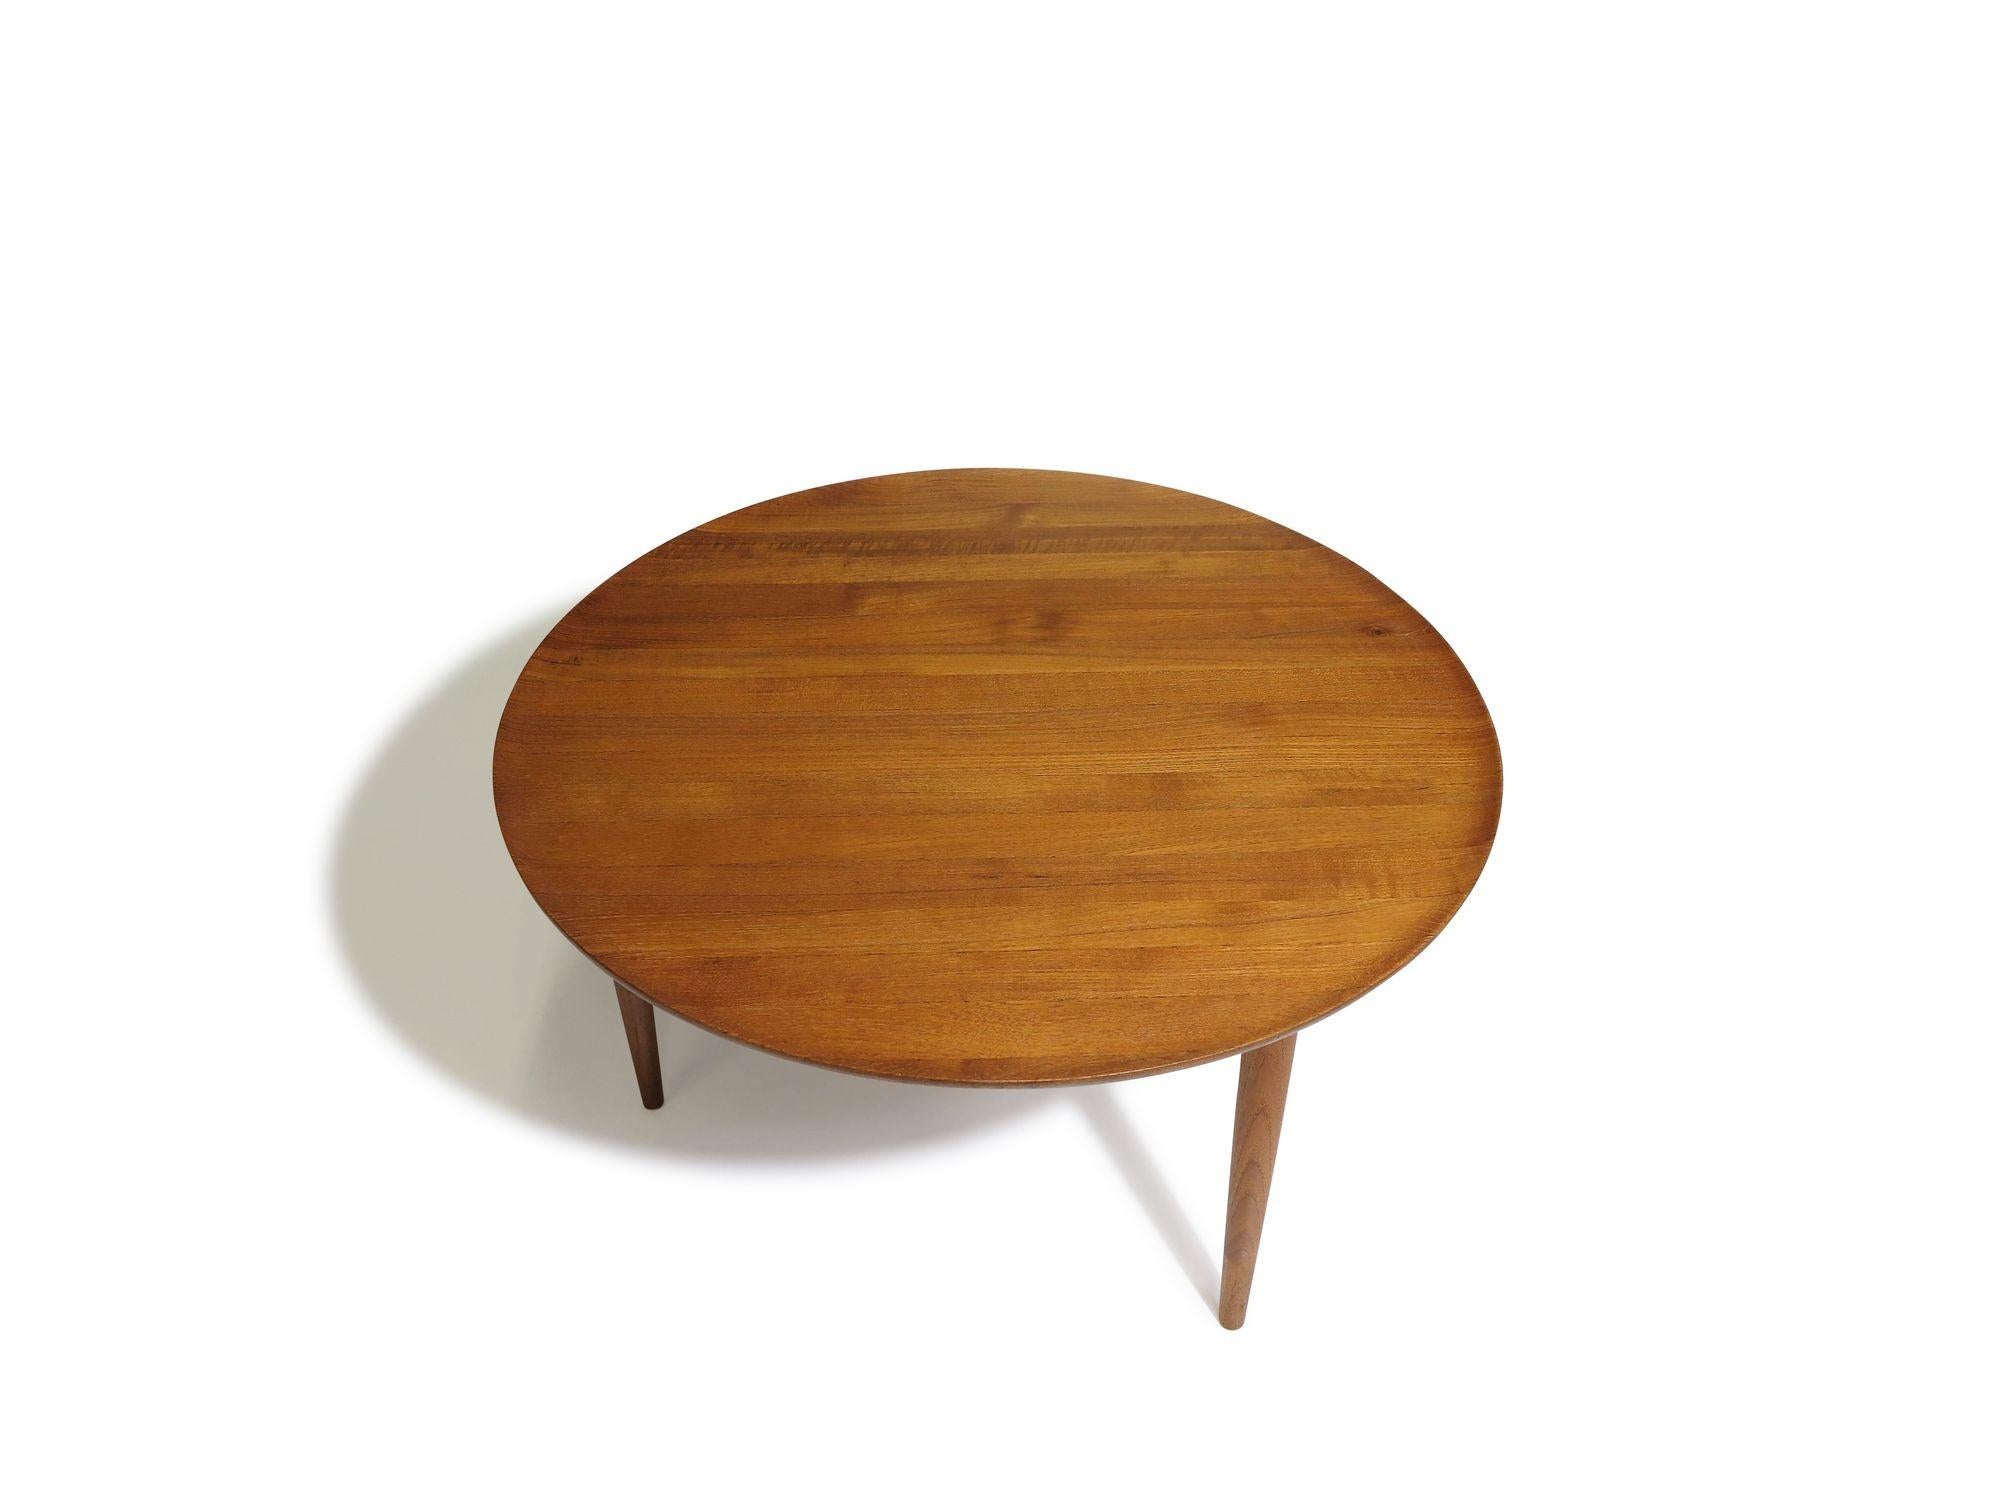 Scandinavian Solid Teak Coffee Table In Excellent Condition For Sale In Oakland, CA